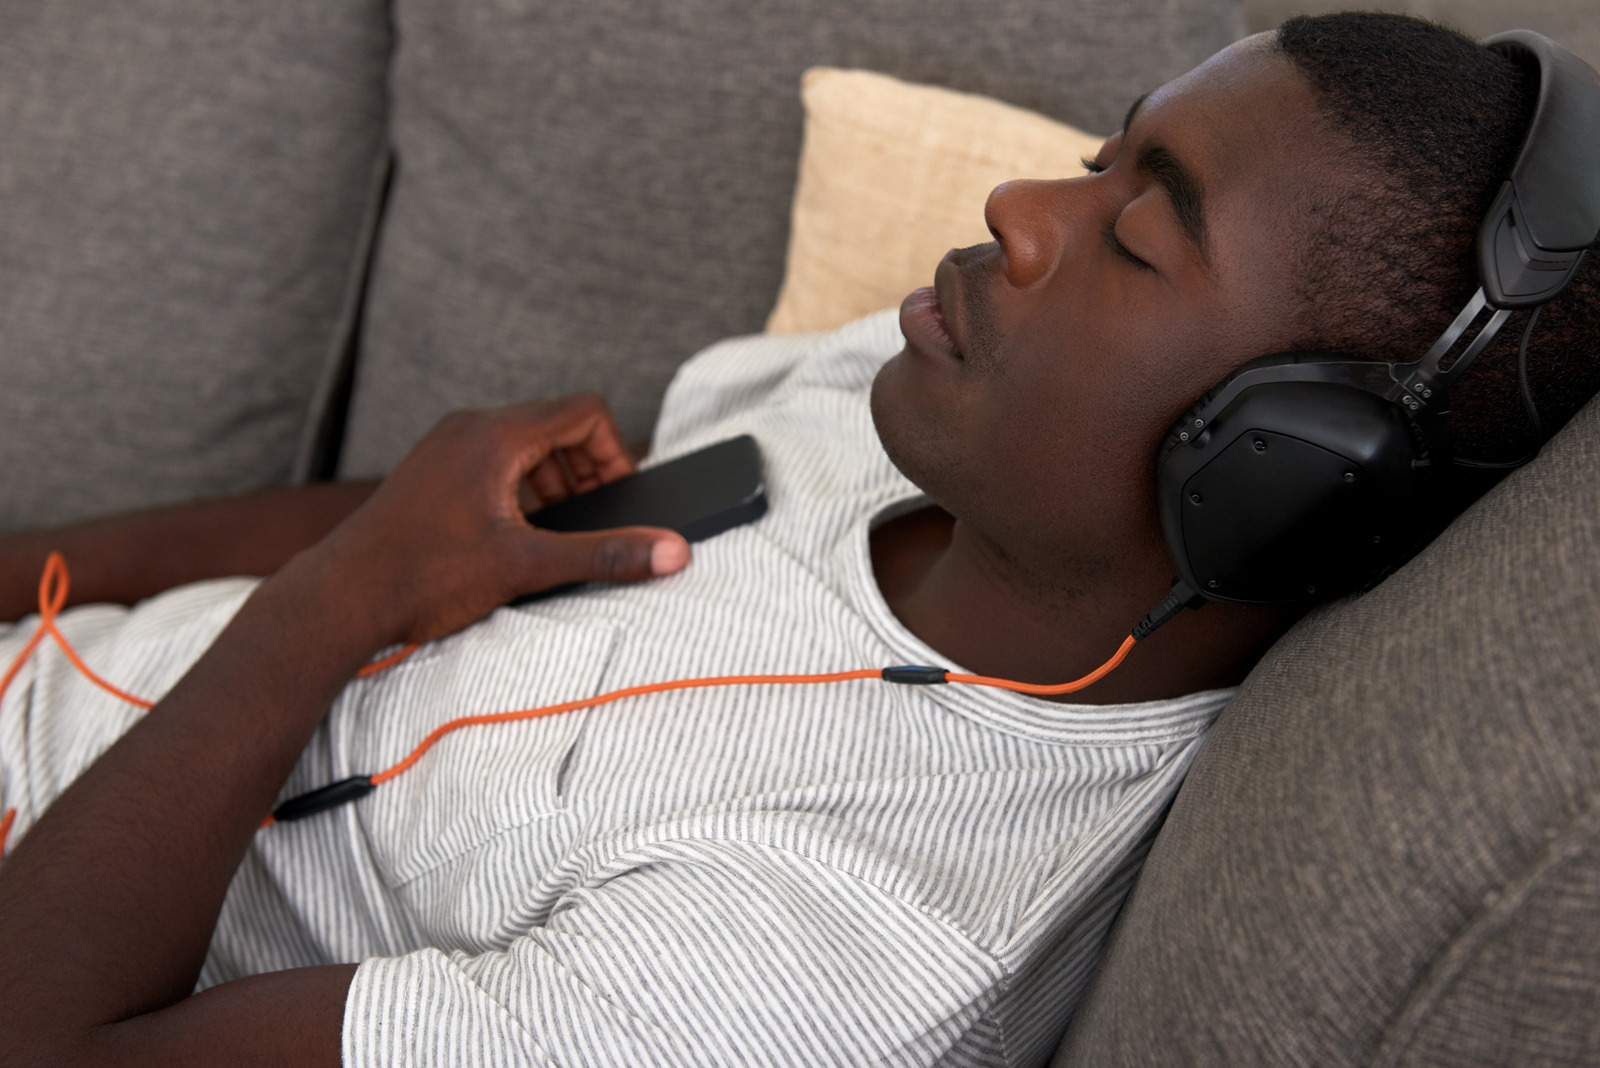 african black man listening to music relaxing on sofa couch in home living room